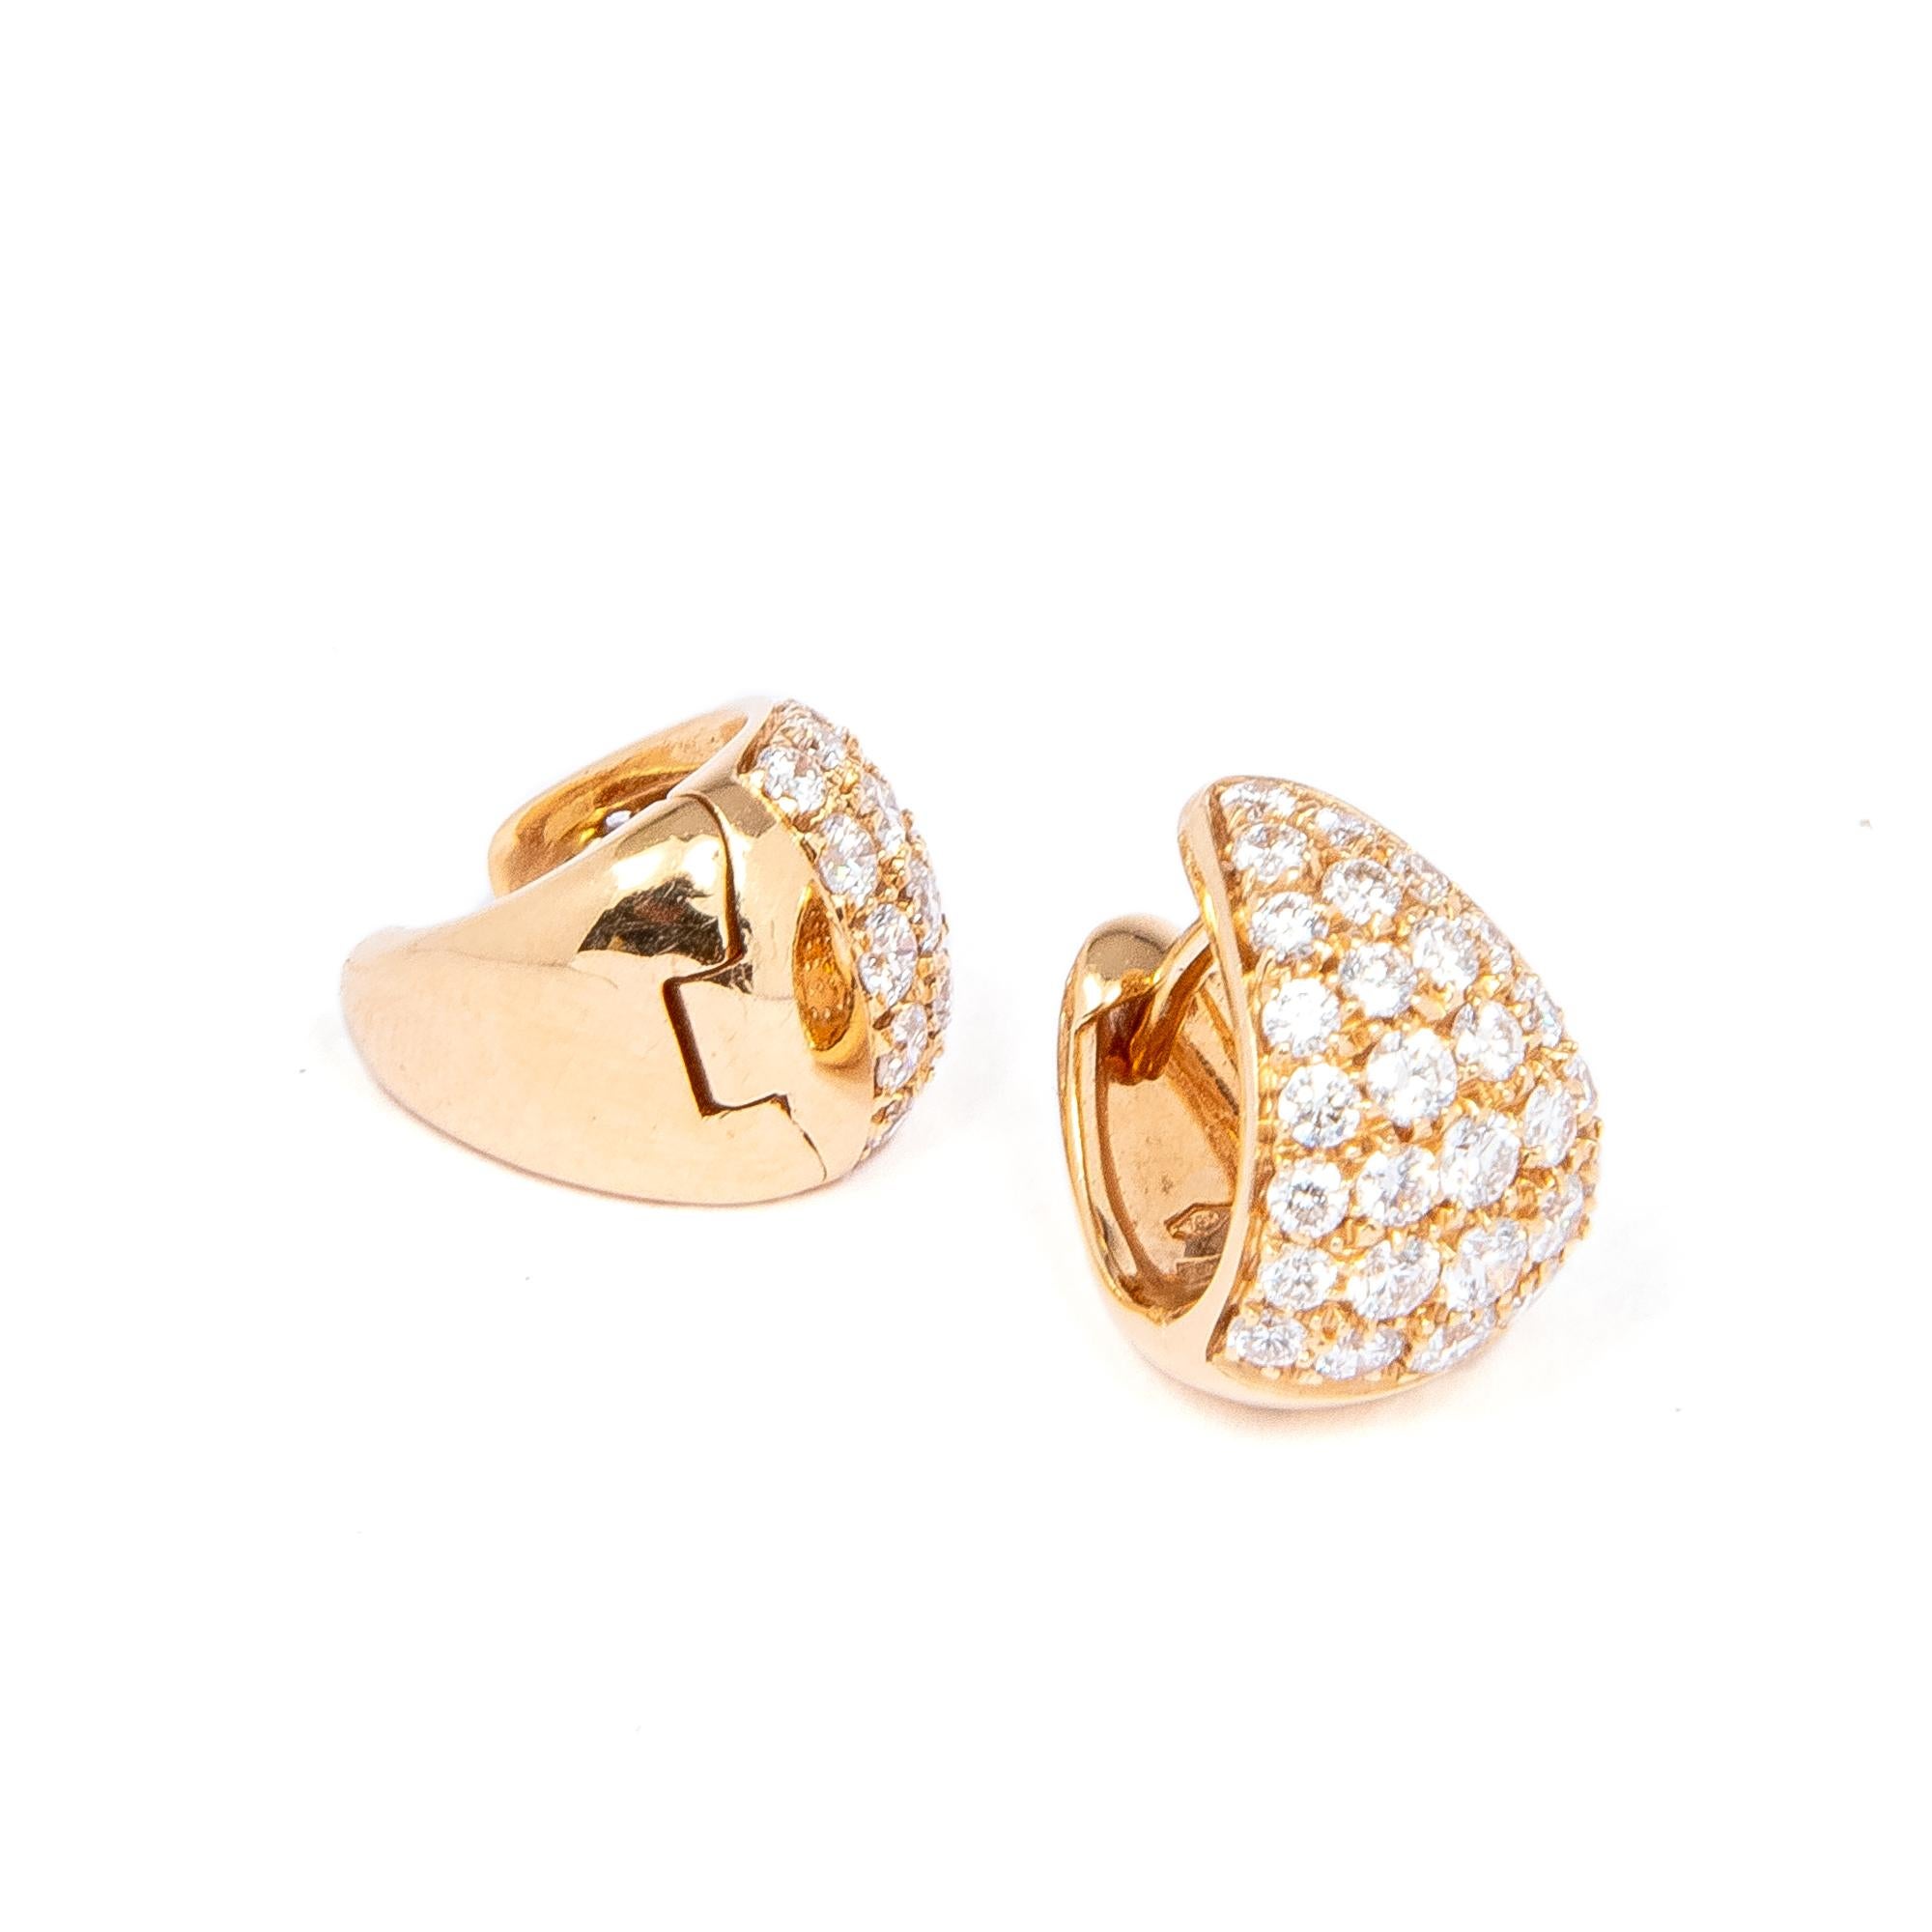 Modern Red Gold Earrings with Diamonds 1.16 Carat